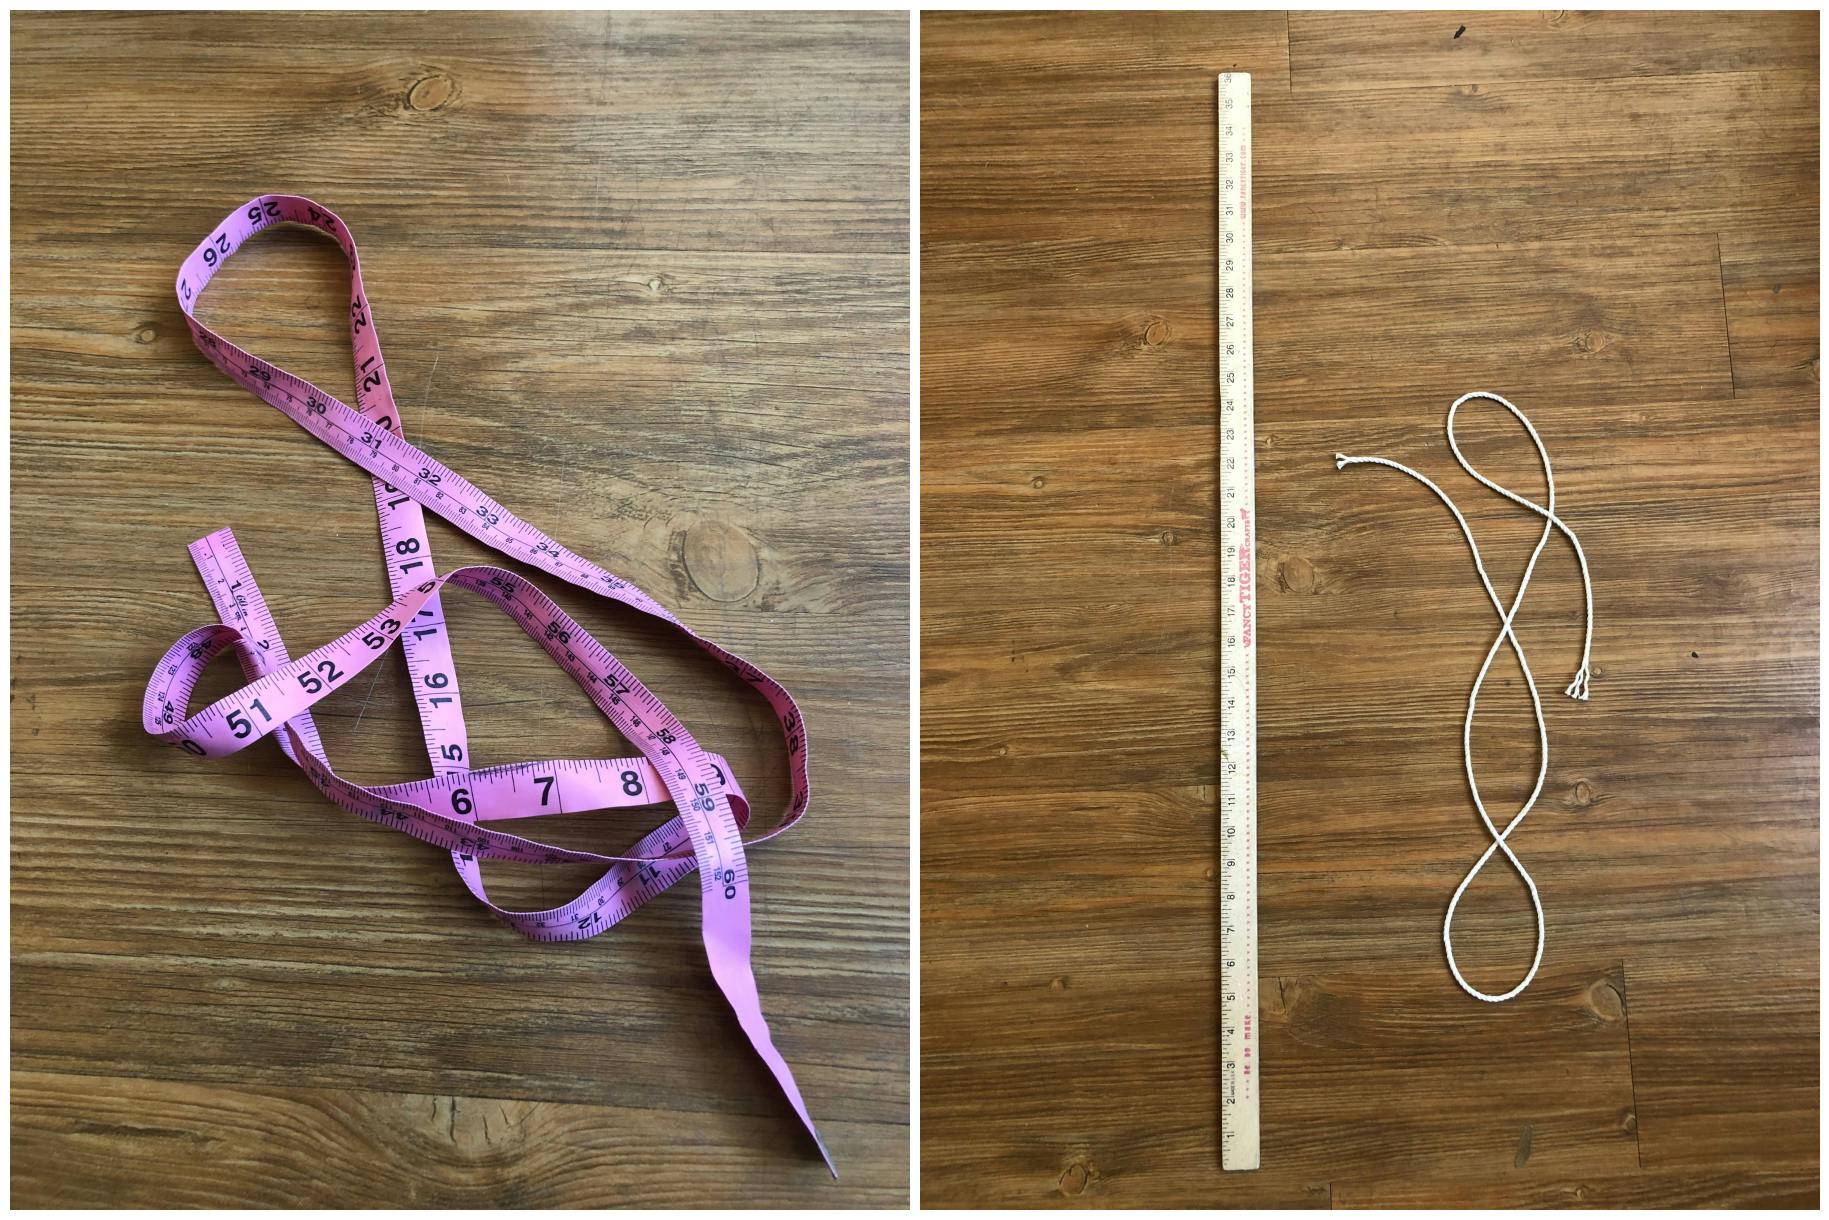 Two side by side photos: a pink measuring tape and a ruler with string next to it